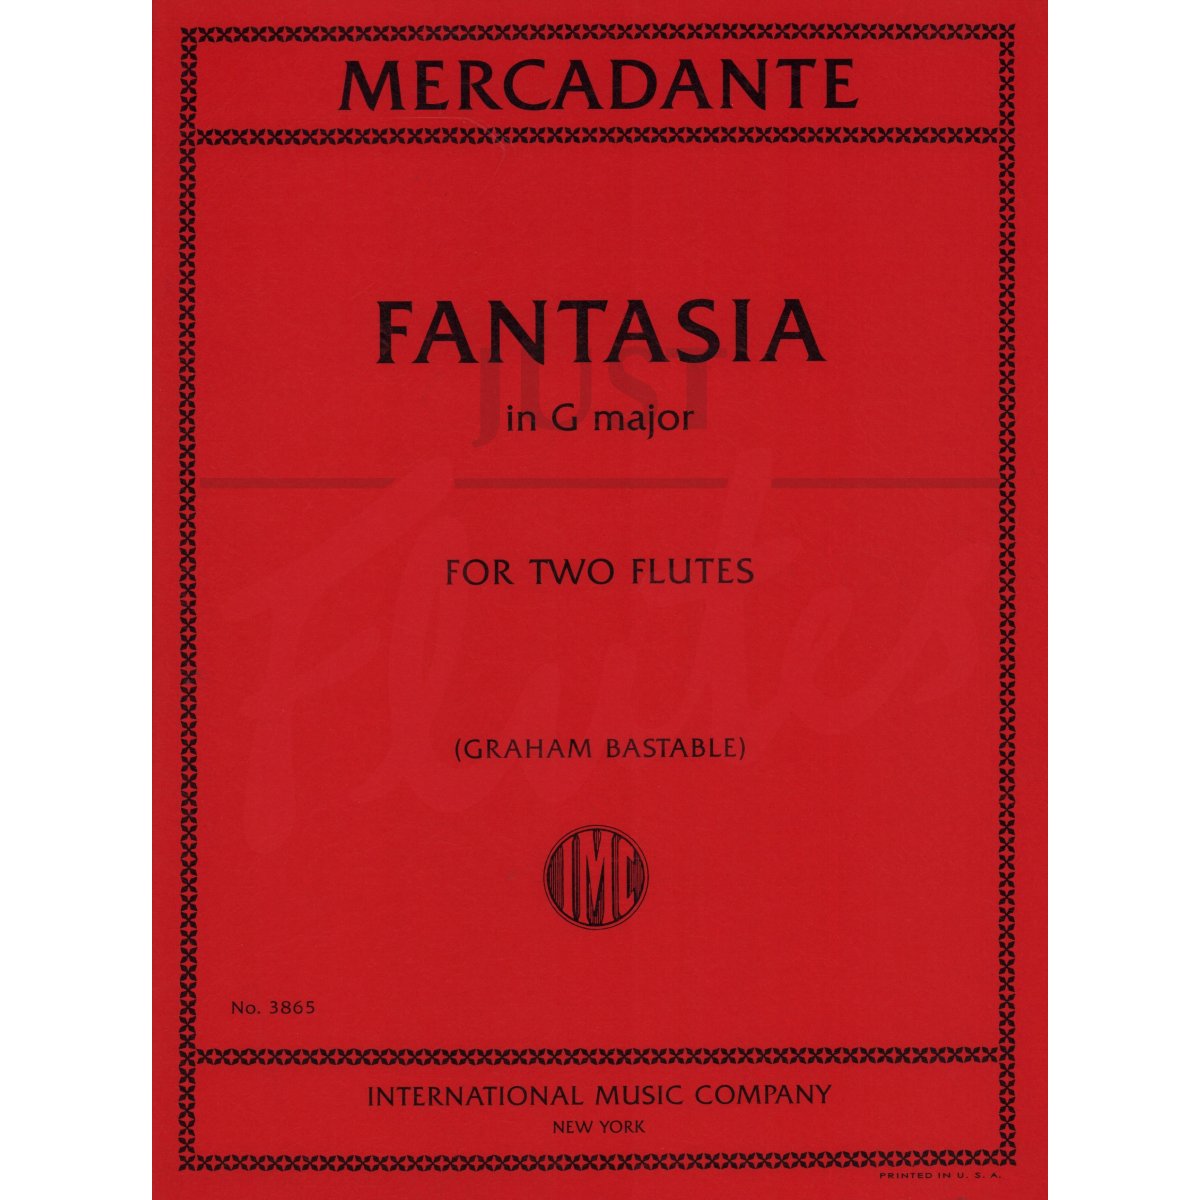 Fantasia in G major for Two Flutes